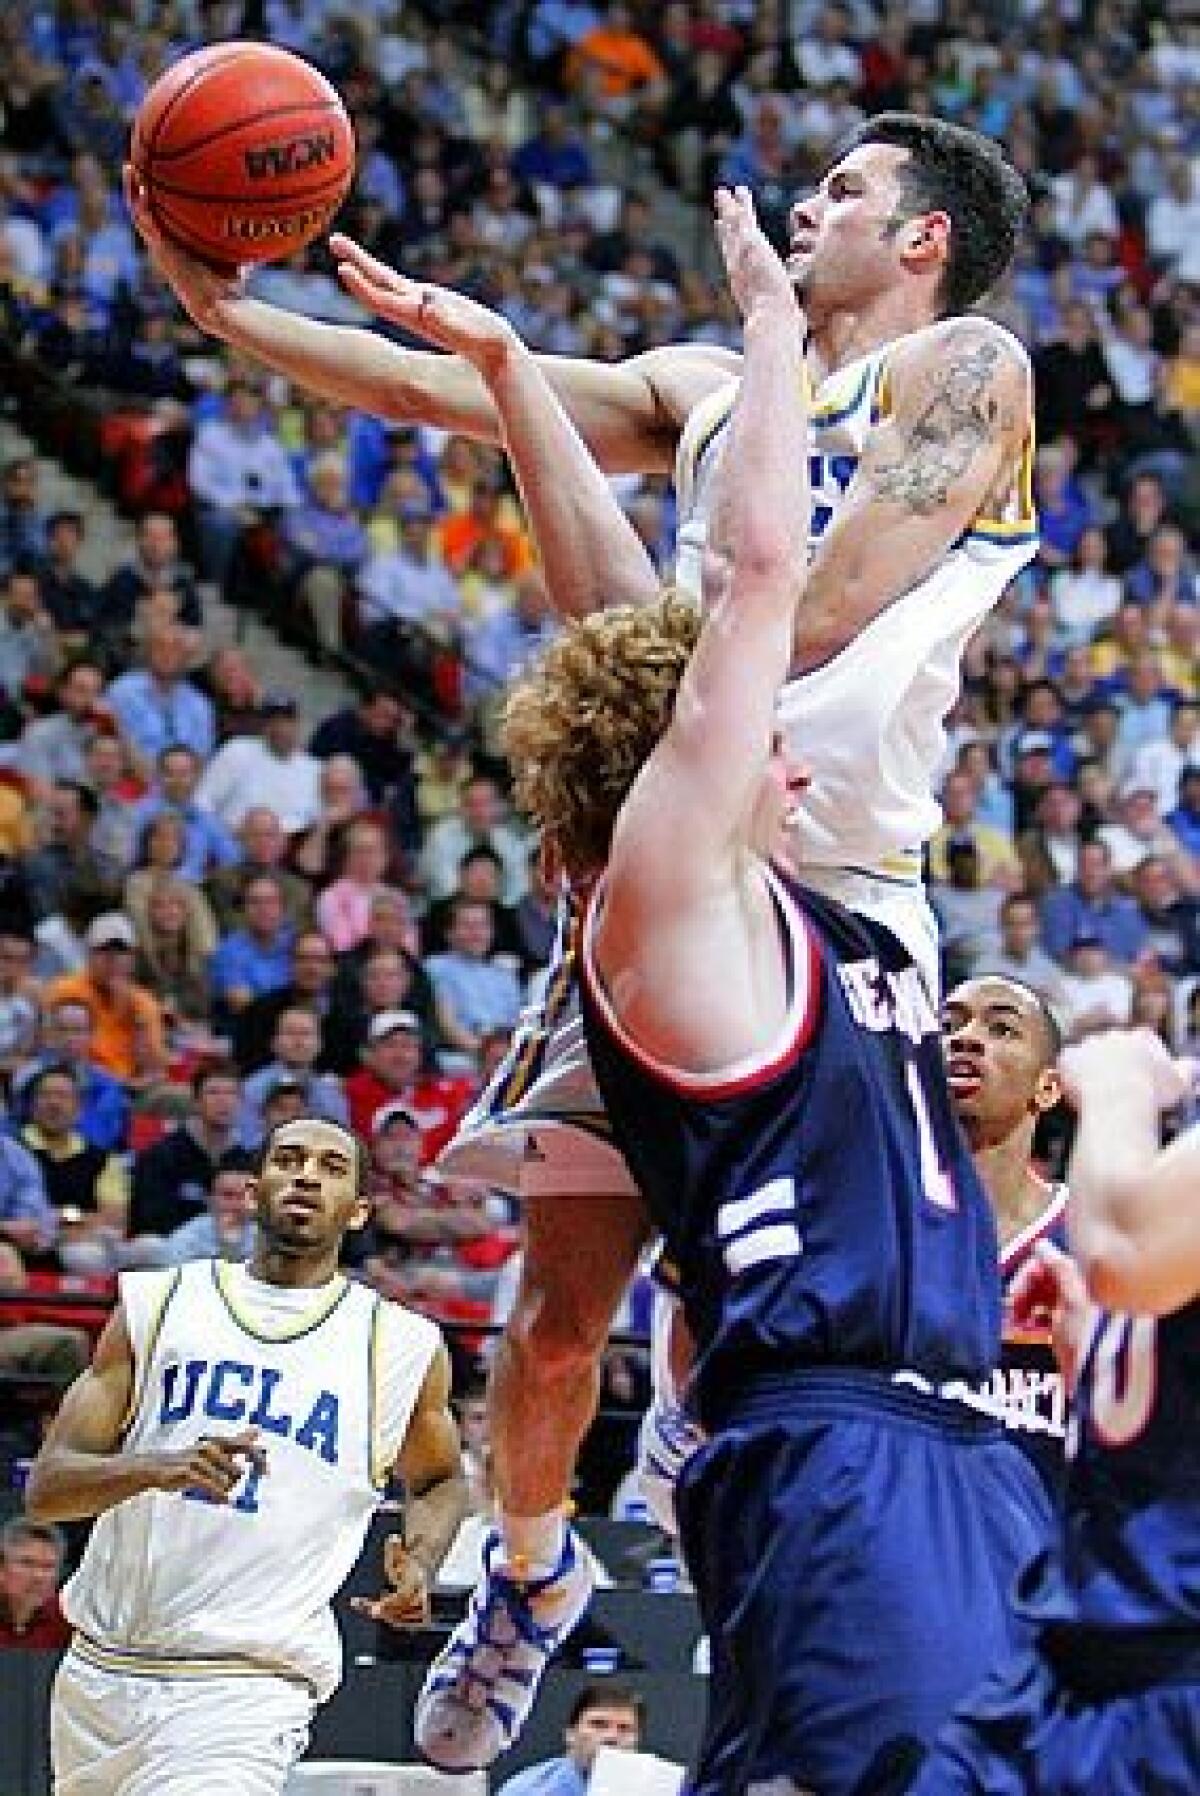 Jordan Farmar cuts through the defense of the Belmont Bruins forward Brian Collins for two points.